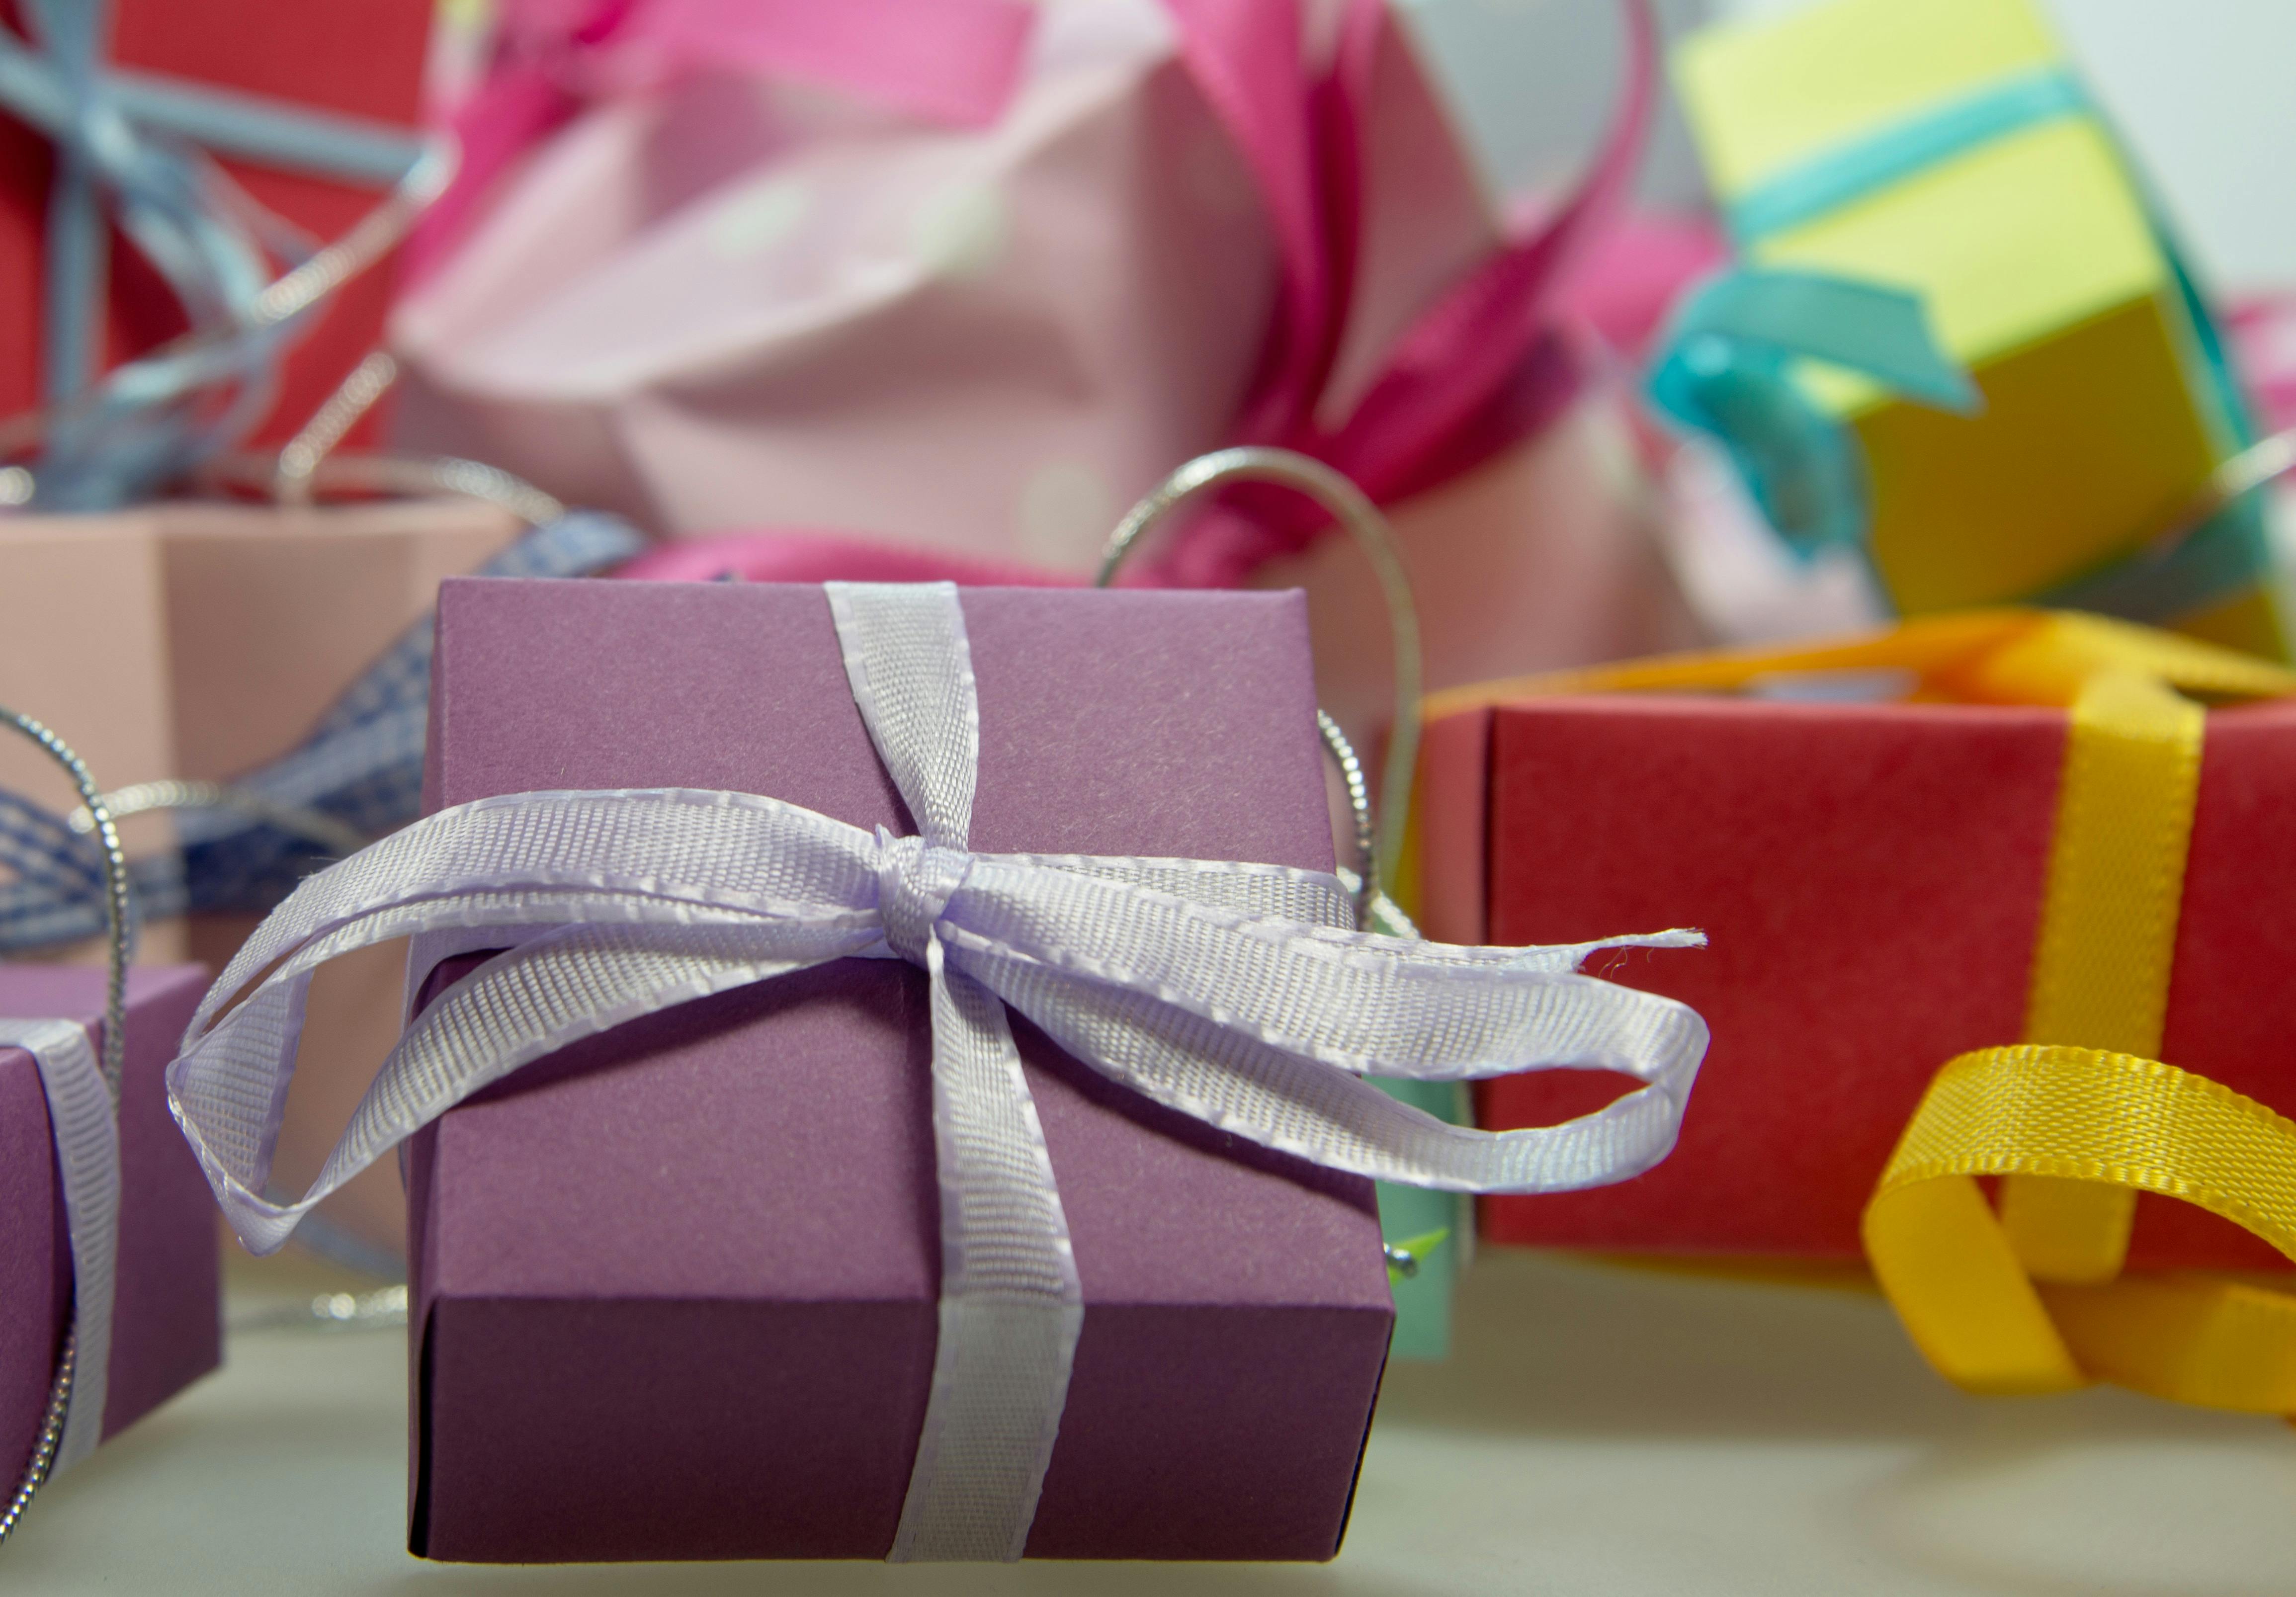 free-stock-photo-of-decoration-gifts-presents